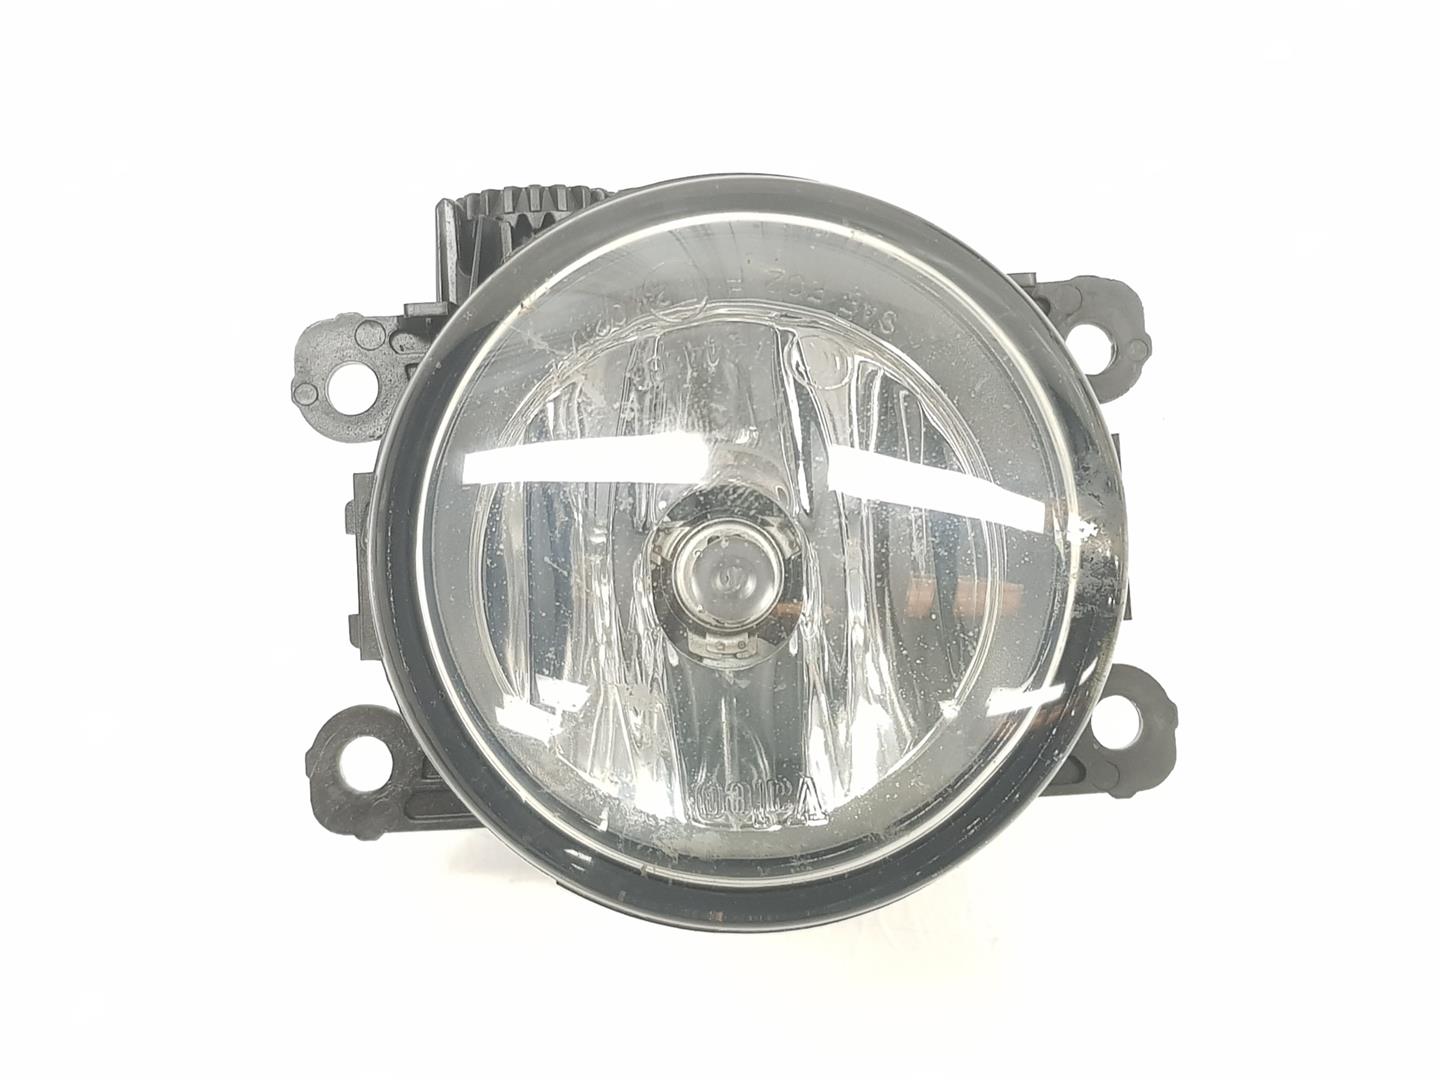 LAND ROVER Discovery 4 generation (2009-2016) Front Right Fog Light LR001587, 6H5215K201AA 21694123